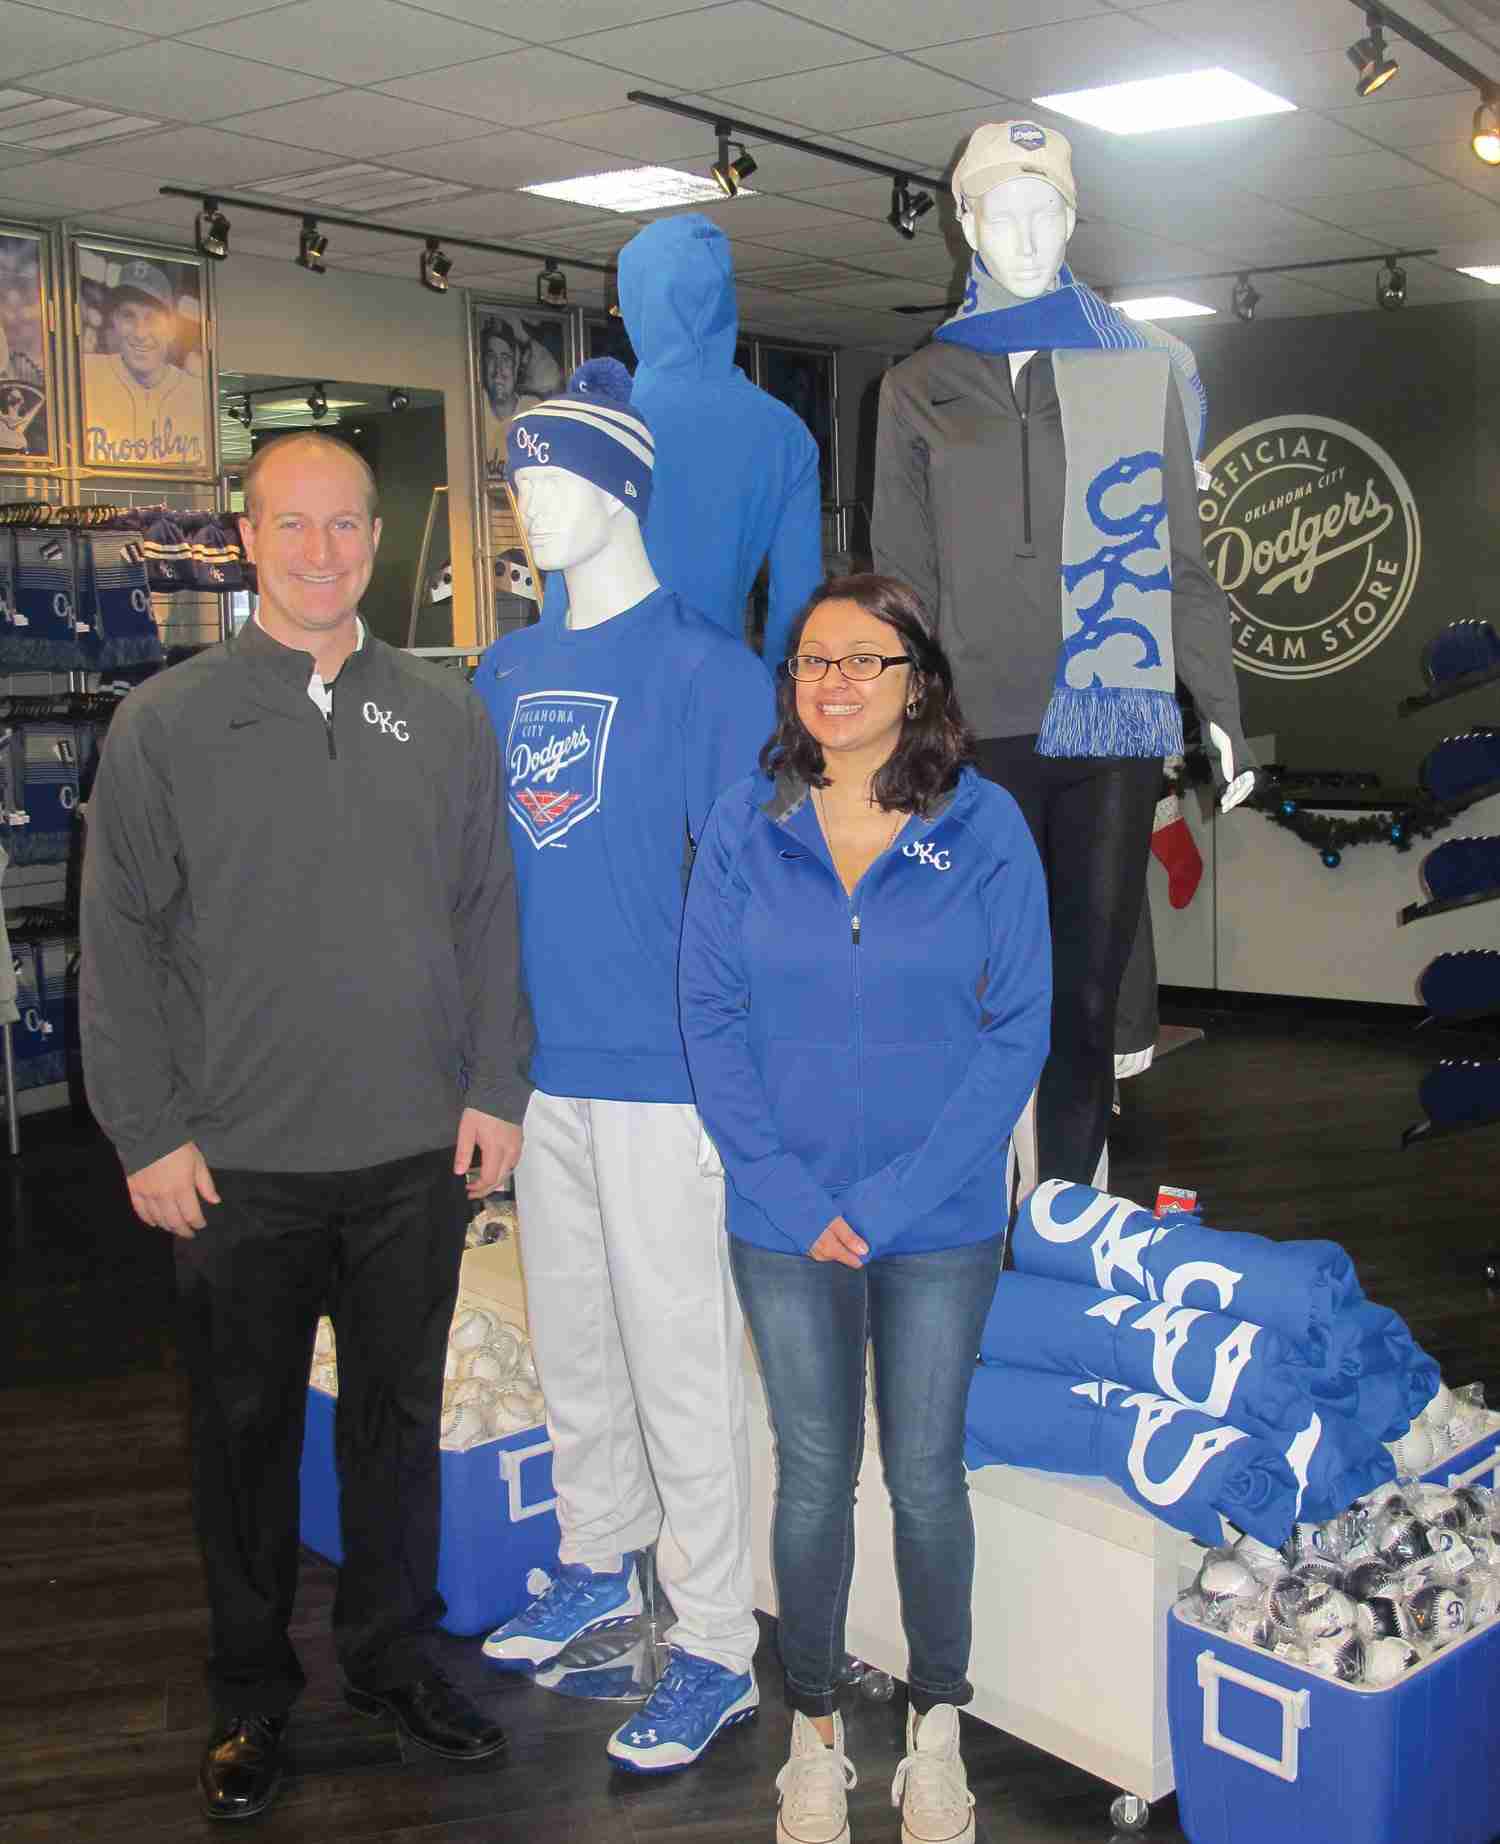 Mitch Stubenhofer, director of operations, and Otilia Mares, retail operations manager, the Oklahoma City Dodgers fan store in Oklahoma City, Okla. Hats are number one in apparel sales for the shop.